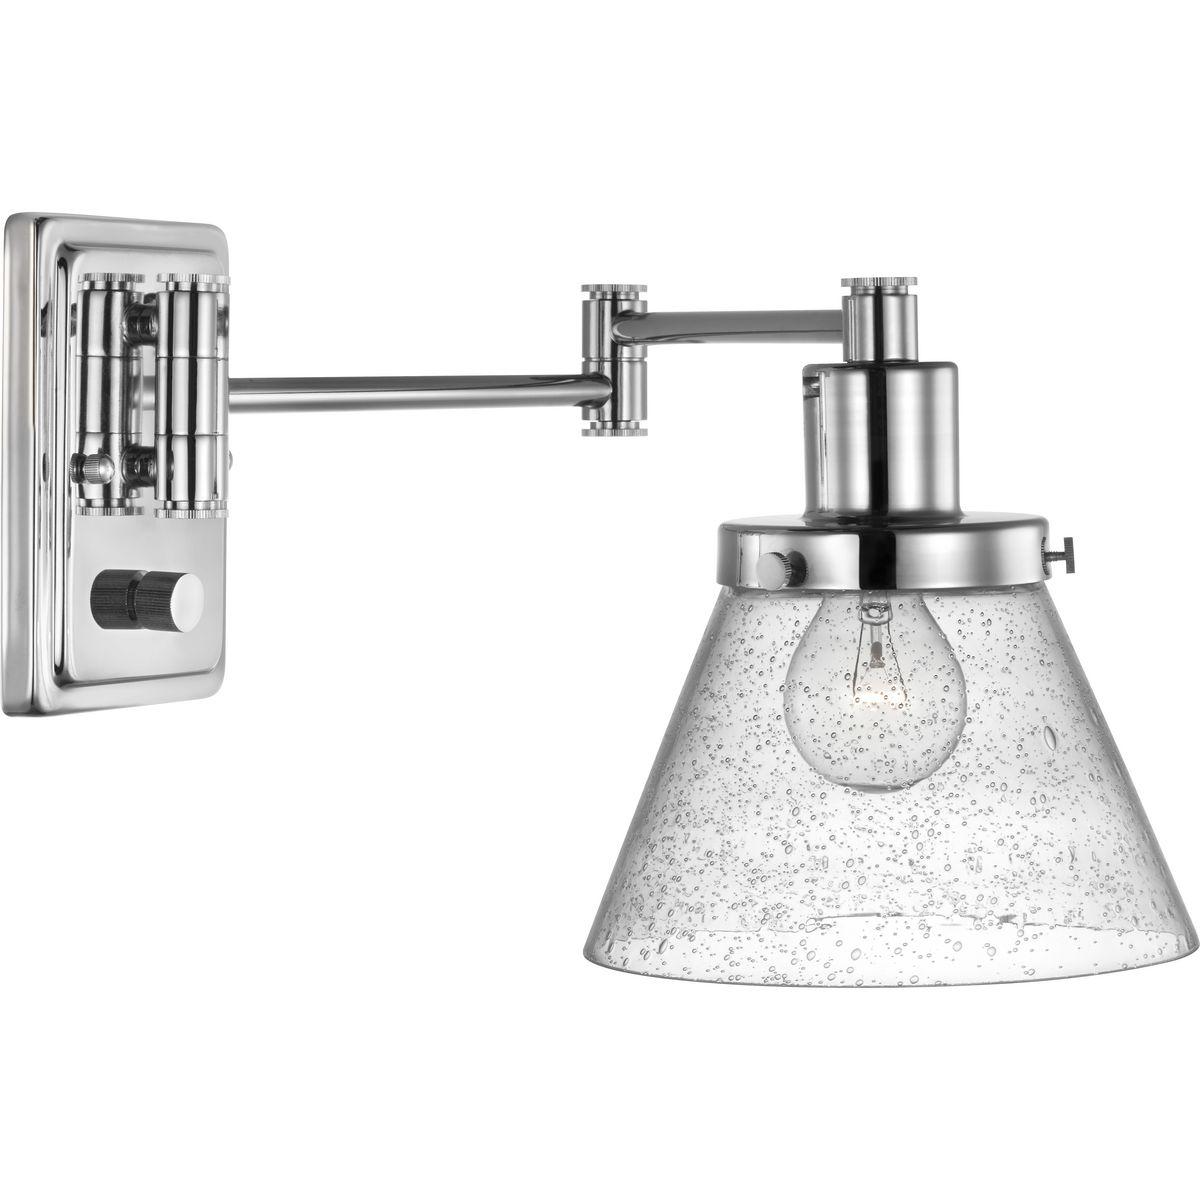 Hubbell P710084-104 Enjoy focused task lighting with the industrial demeanor of this one-light swing arm wall bracket. A clear seeded glass shade is ready to provide you with focused task light wherever illumination is called upon. The light fixture's signature adjustable ar